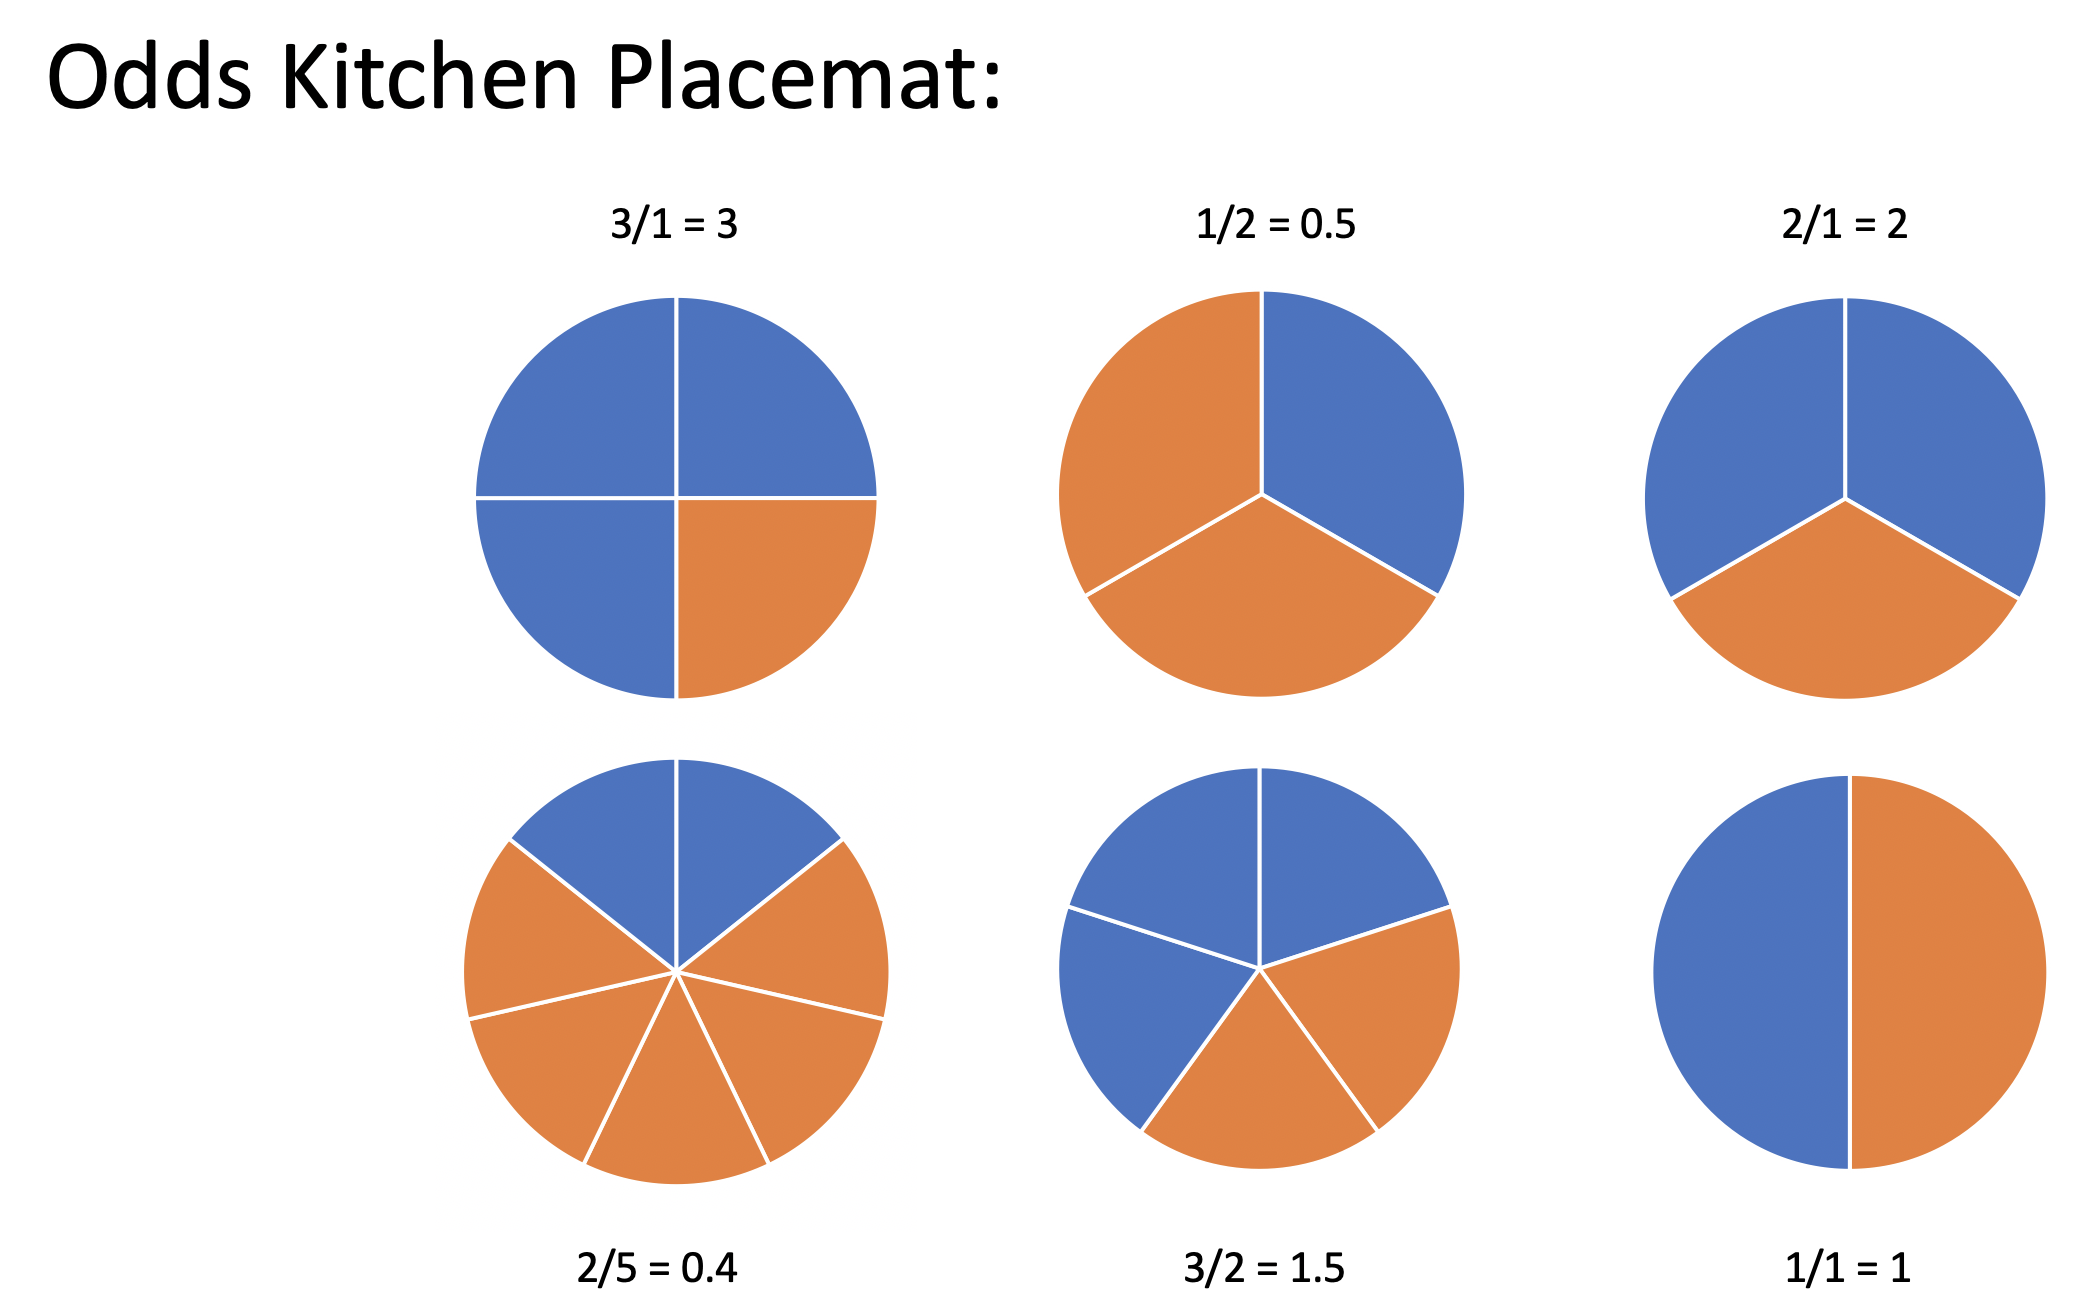 Six different pie charts are shown, each with a different number of equivalently sized pie pieces colored either blue or orange.  For example, one pie has three blue and two orange pieces.  Below that particular pie is written 3/2 = 1.5 which is the odds of the blue pie pieces.